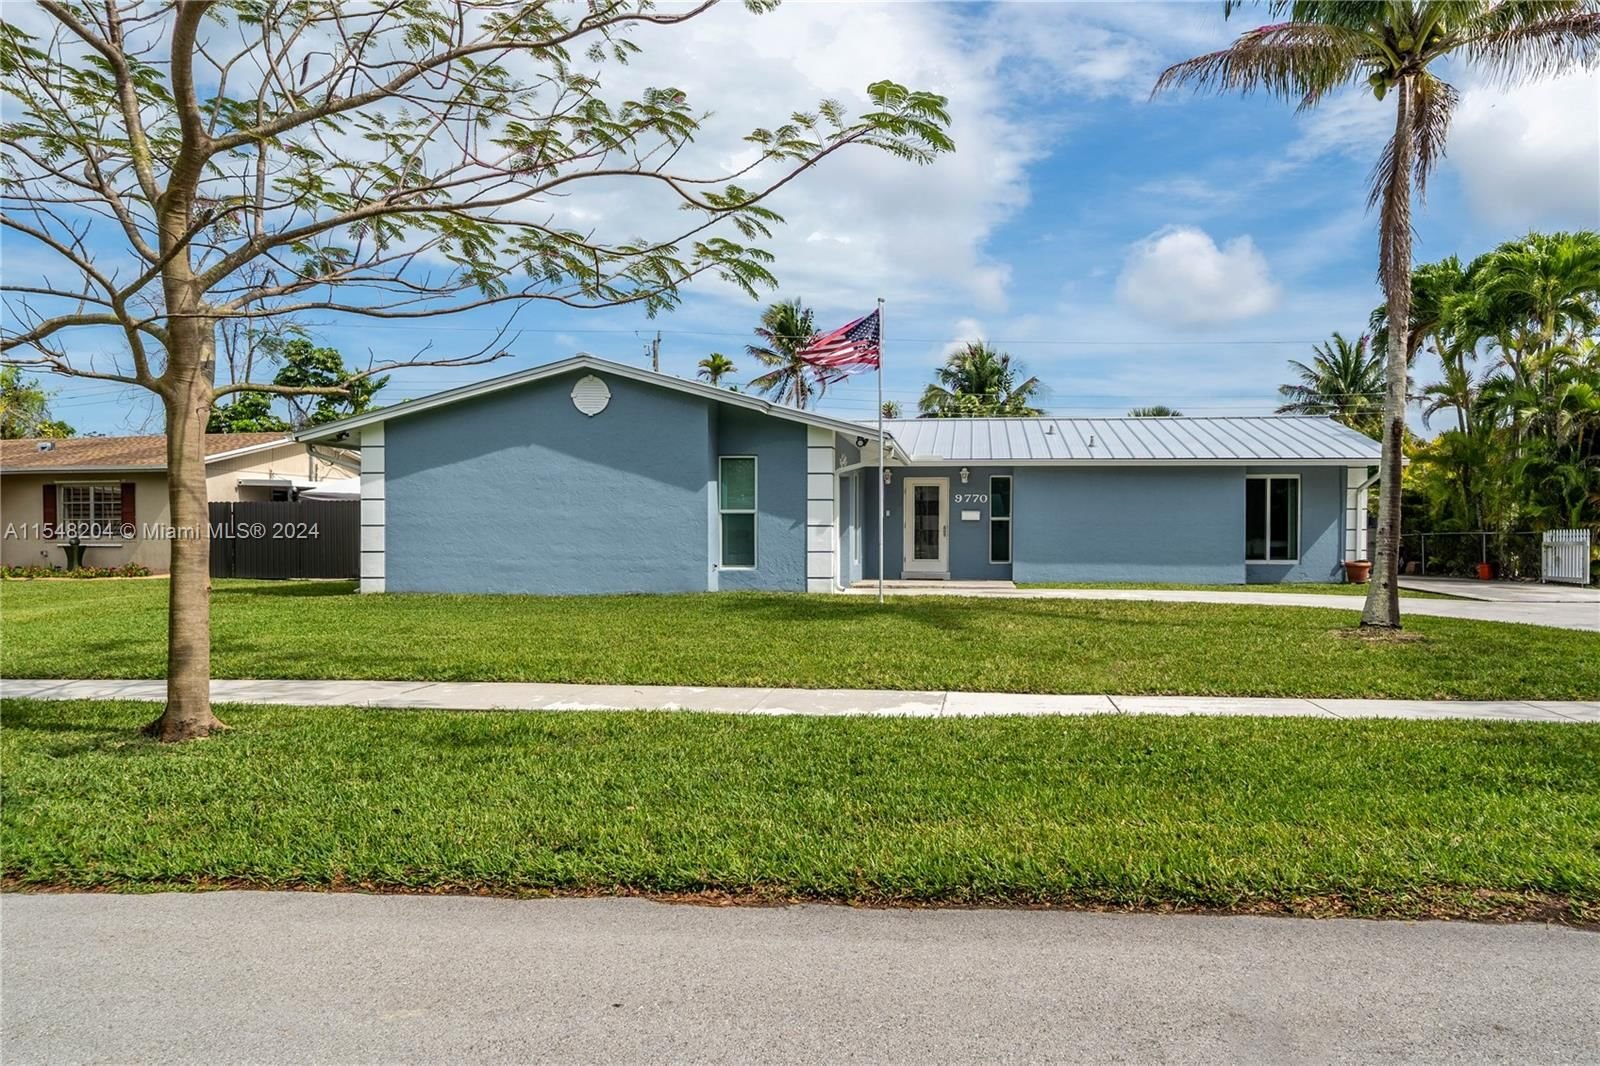 Real estate property located at 9770 Bel Aire Dr, Miami-Dade County, BEL AIRE SEC 3, Cutler Bay, FL